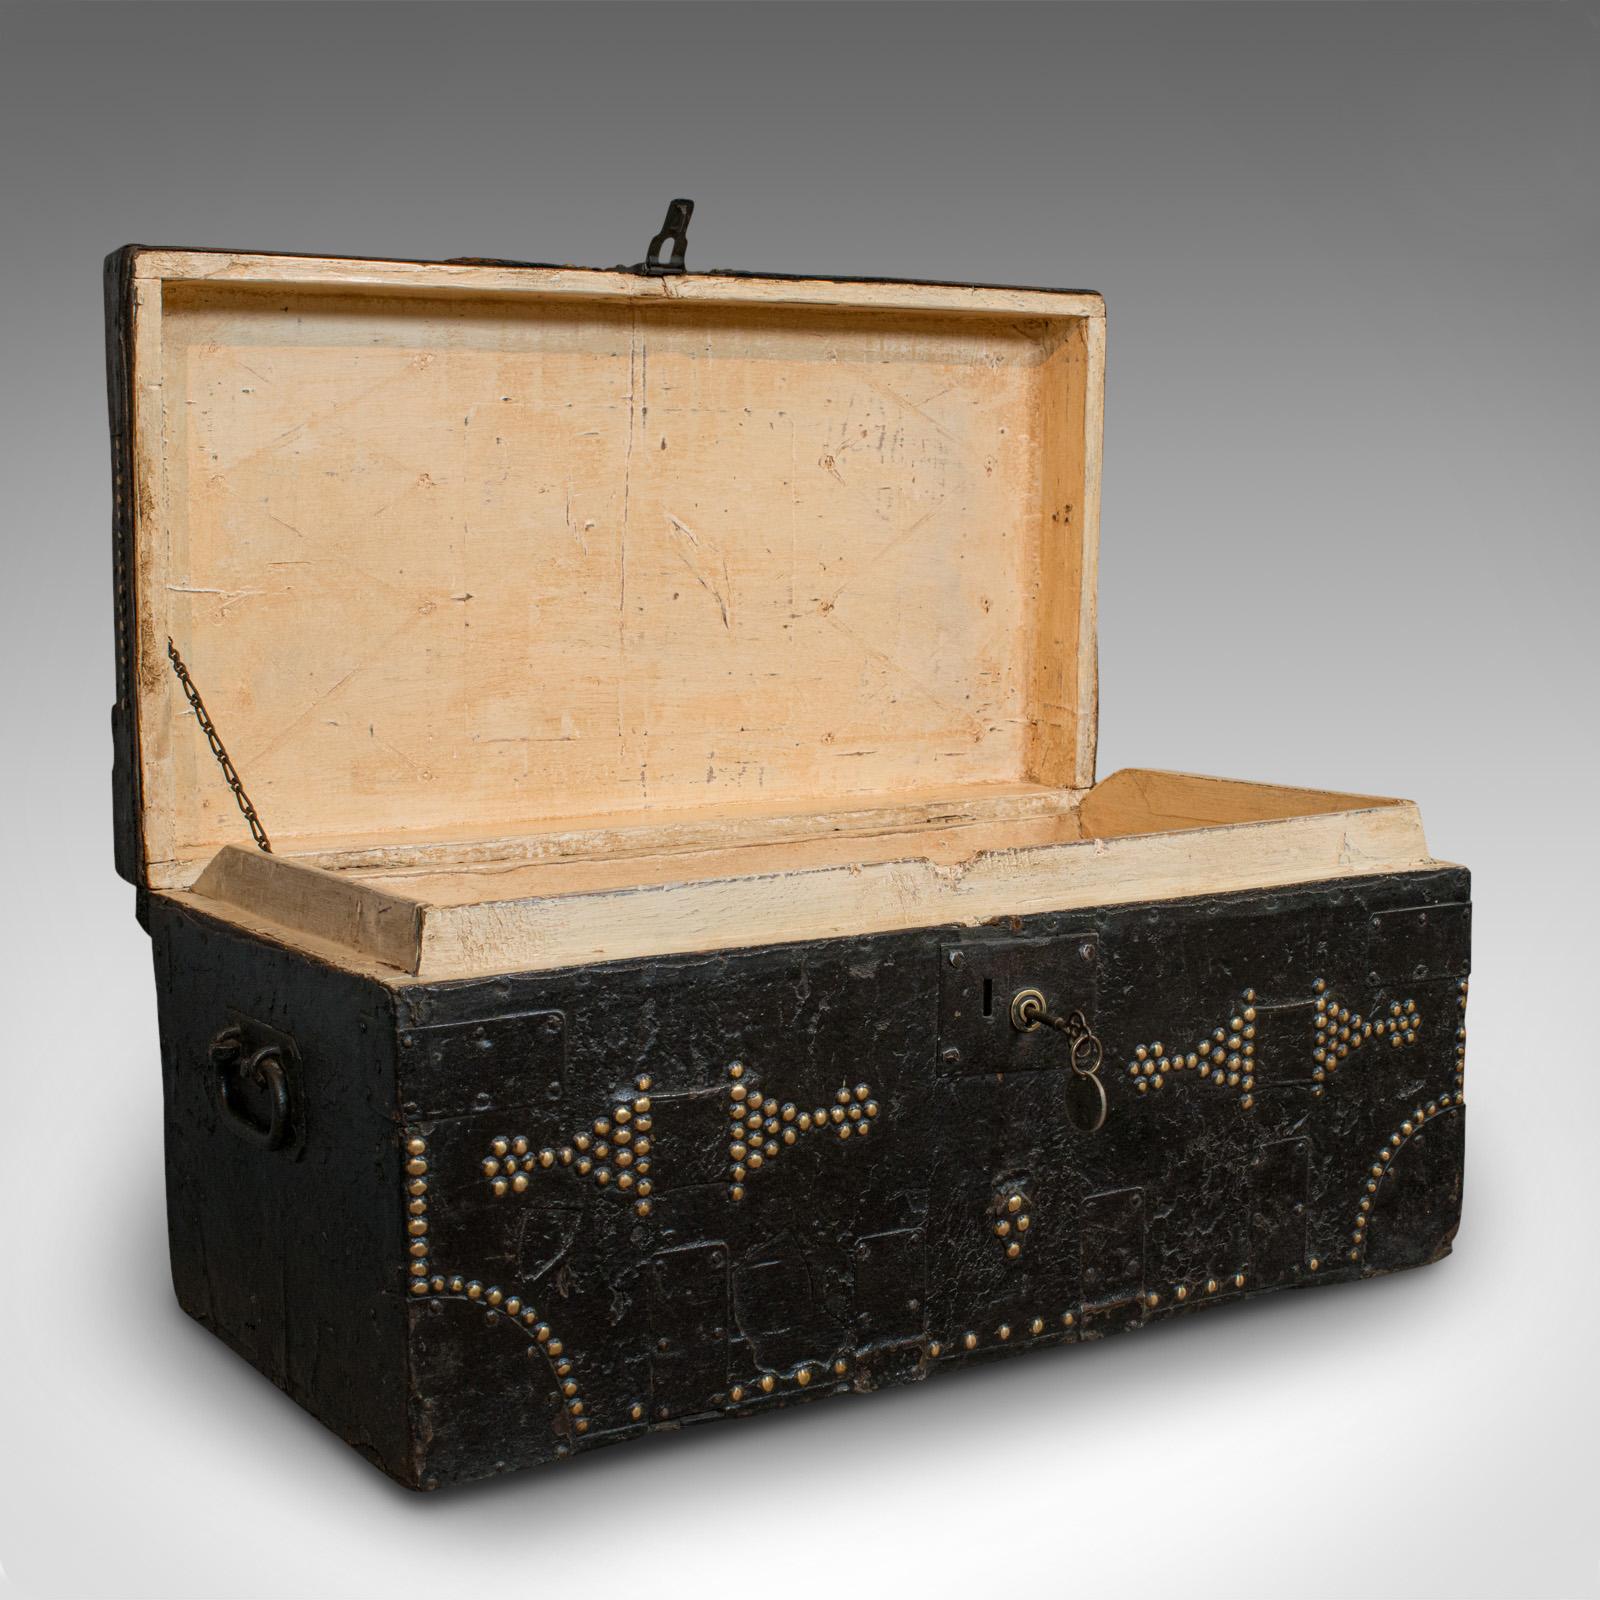 This is an antique merchant's trunk. An English, metal bound, ebonised pine tool chest, dating to the Victorian period, circa 1890.

Displays a desirable aged patina and weathering
Metal bound and riveted for strength over quality, ebonised